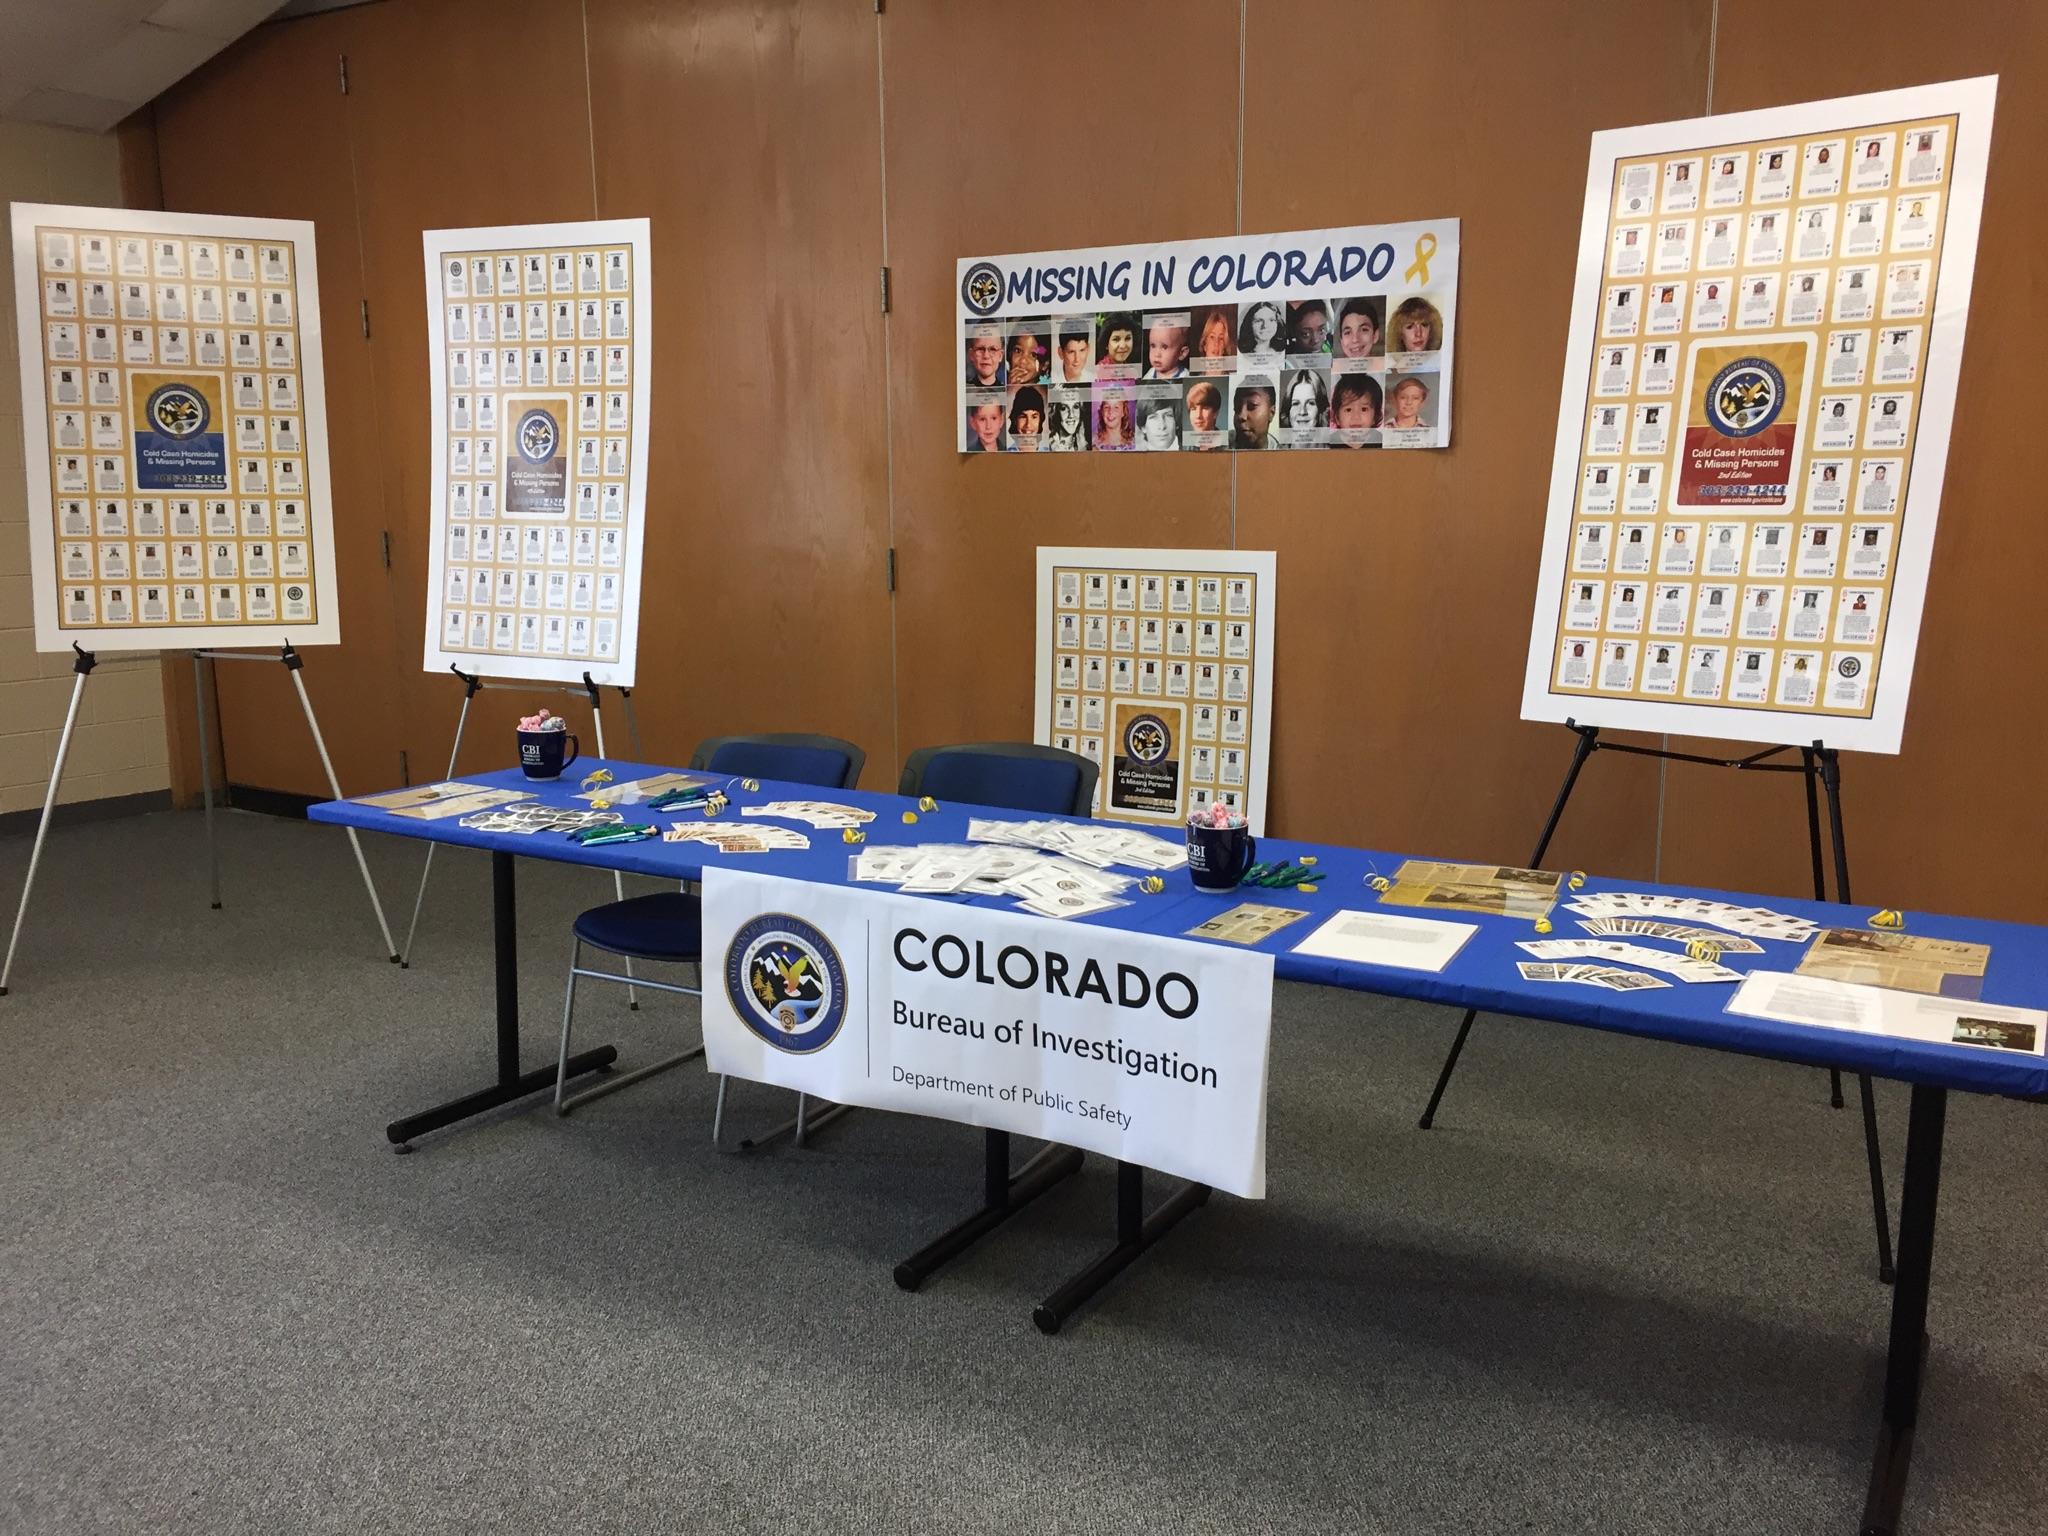 Missing in Colorado event set up with table, easels and materials